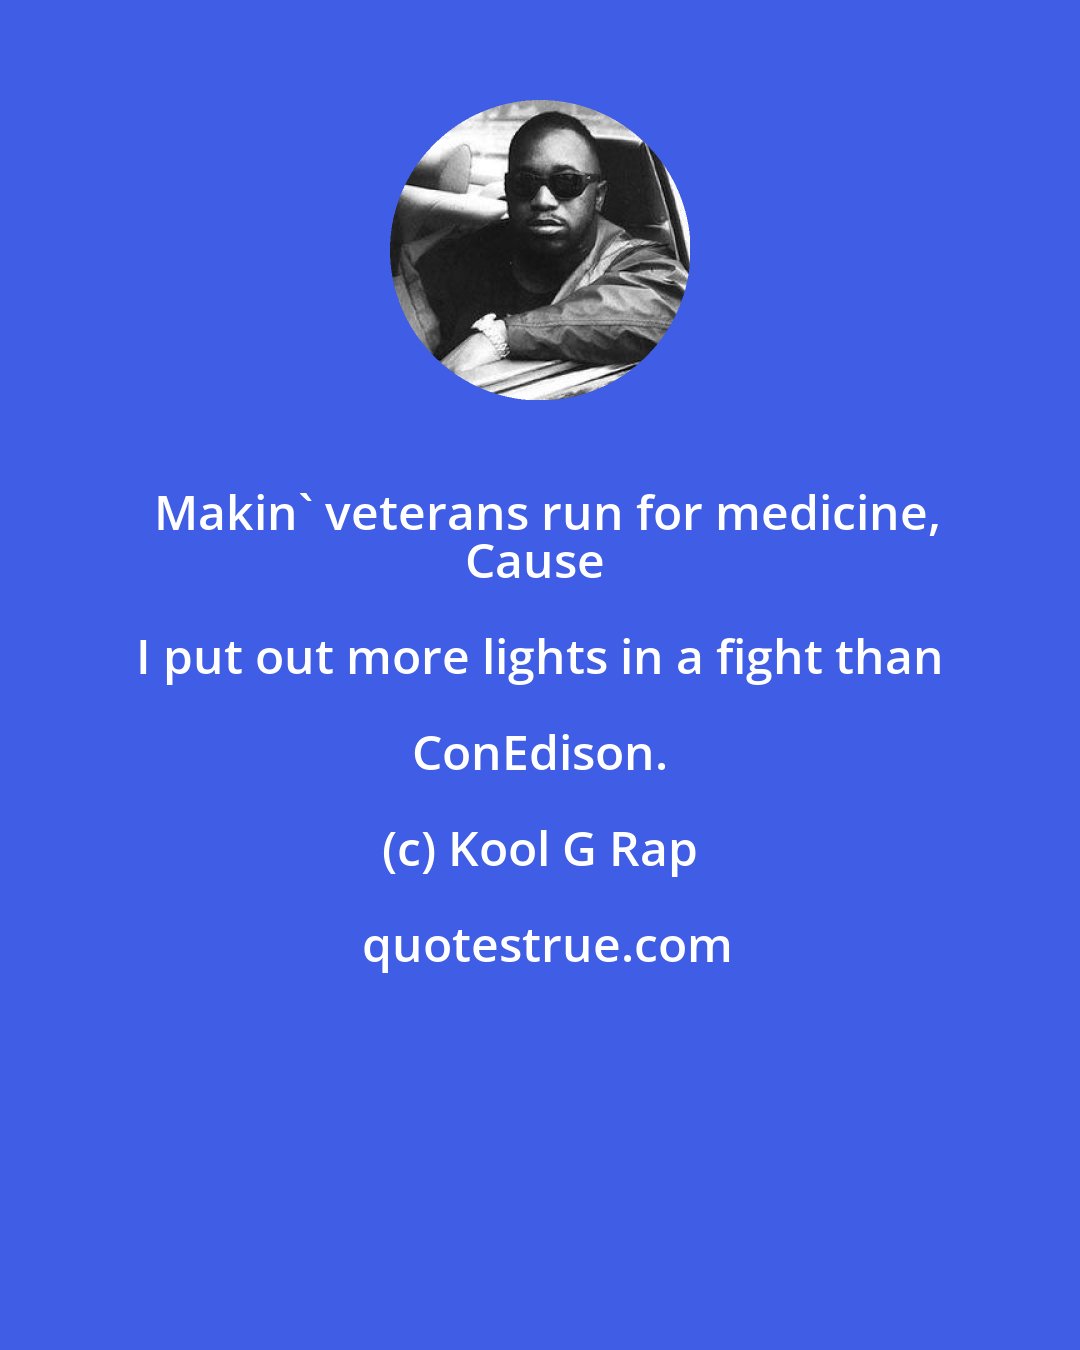 Kool G Rap: Makin' veterans run for medicine,
Cause I put out more lights in a fight than ConEdison.